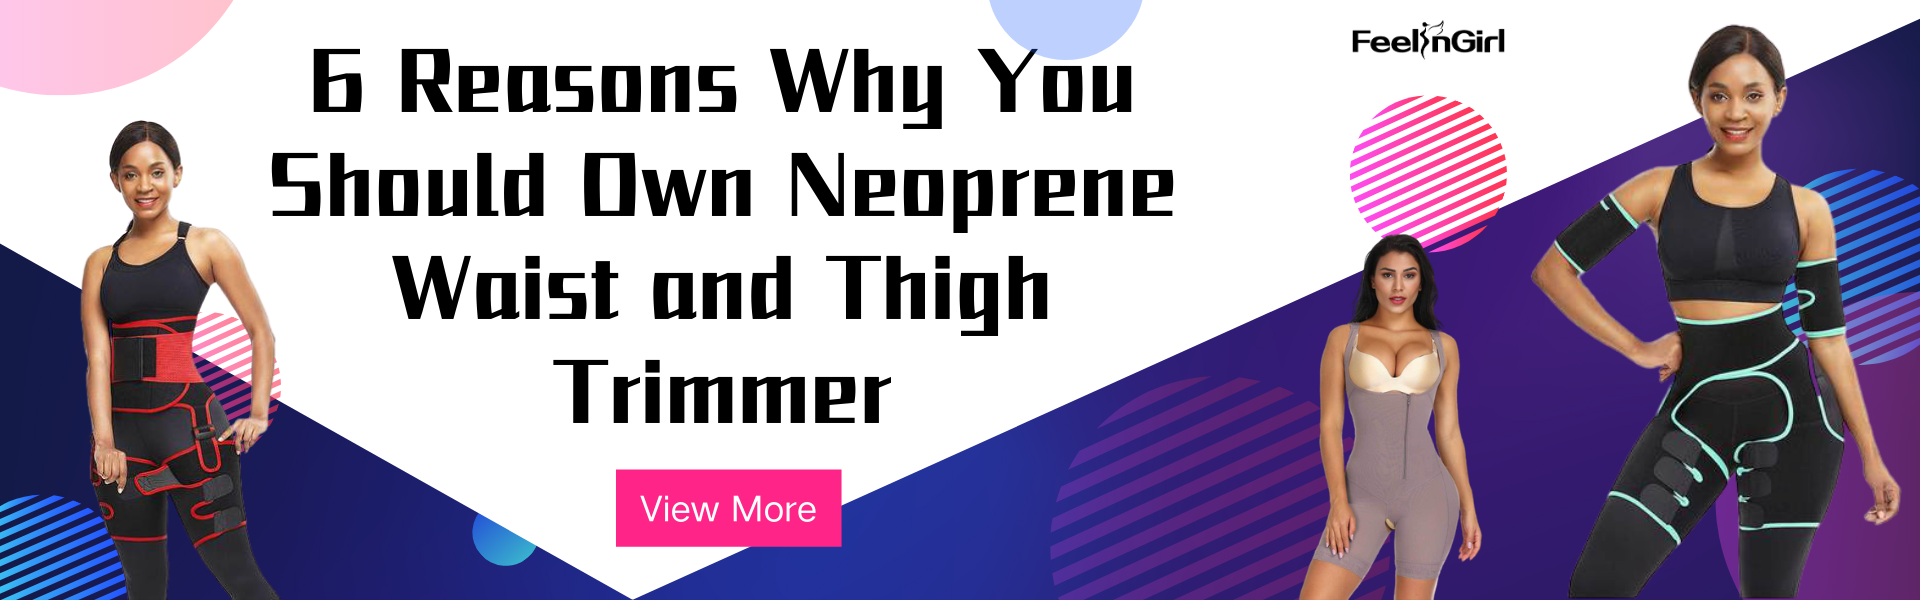 6 Reasons Why You Should Own Neoprene Waist and Thigh Trimmer